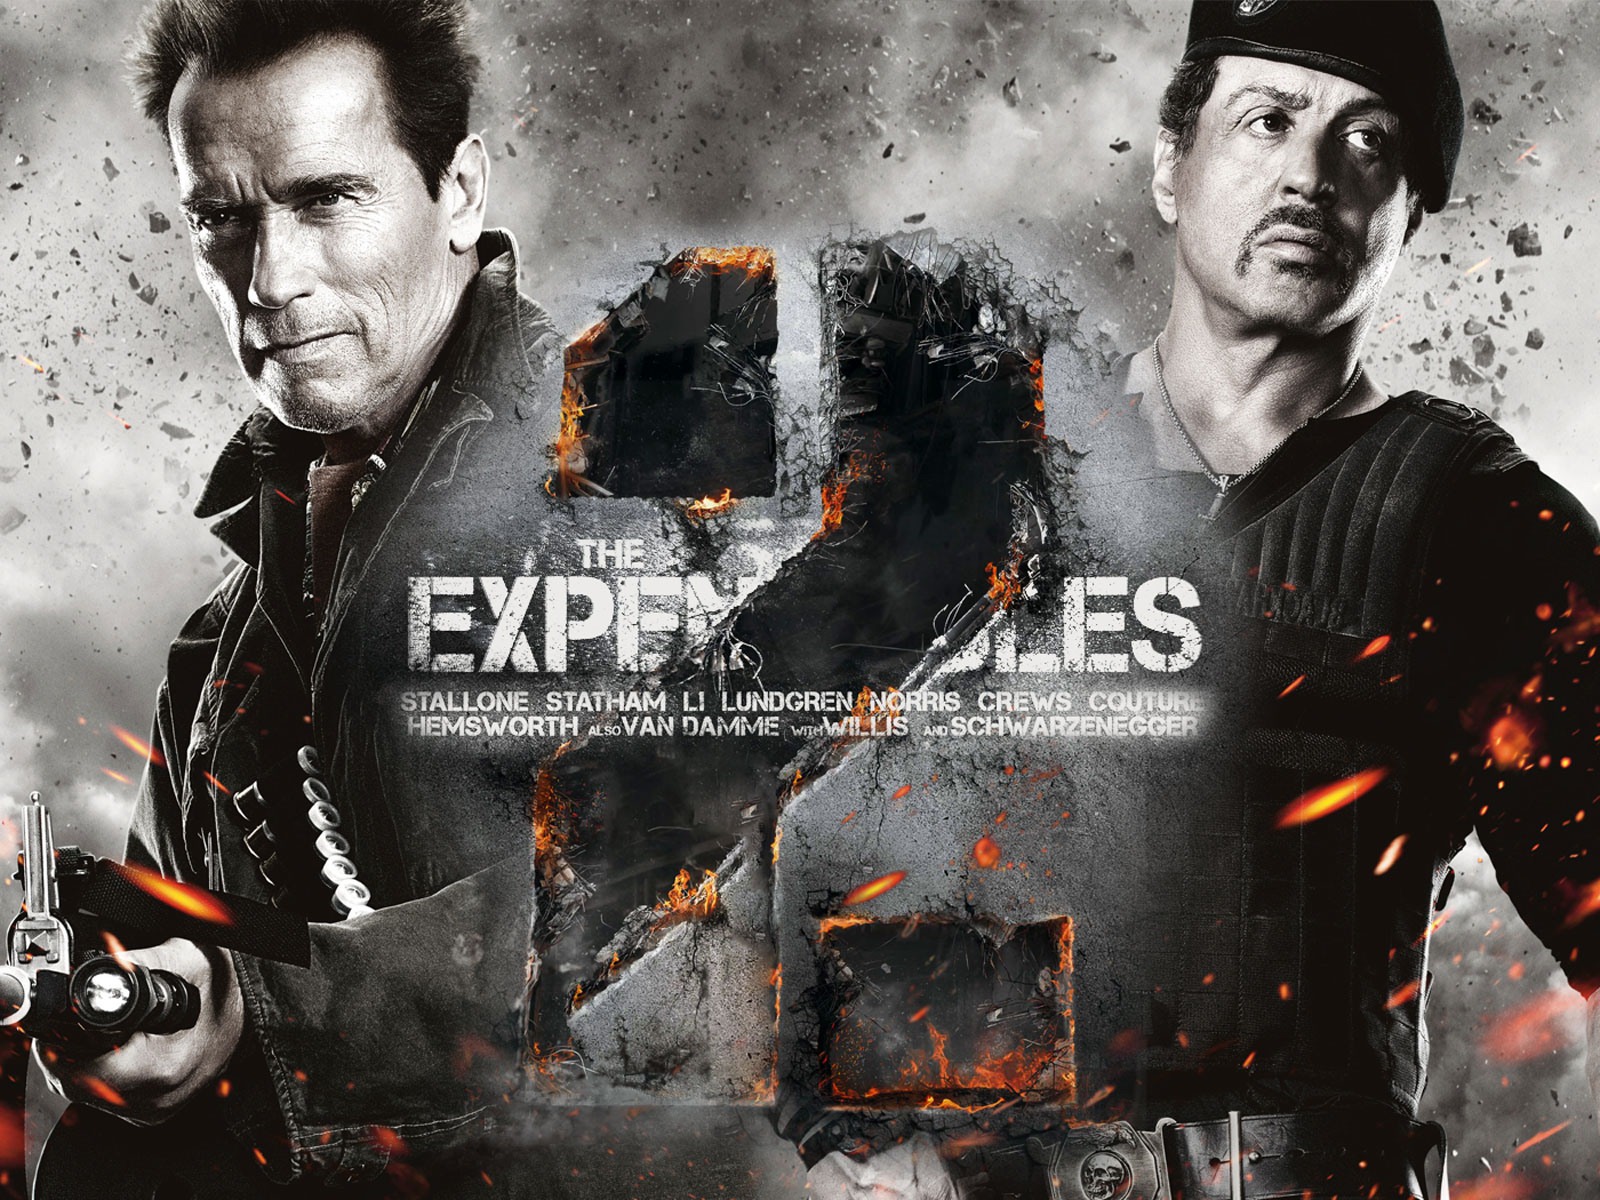 2012 Expendables2 HDの壁紙 #1 - 1600x1200